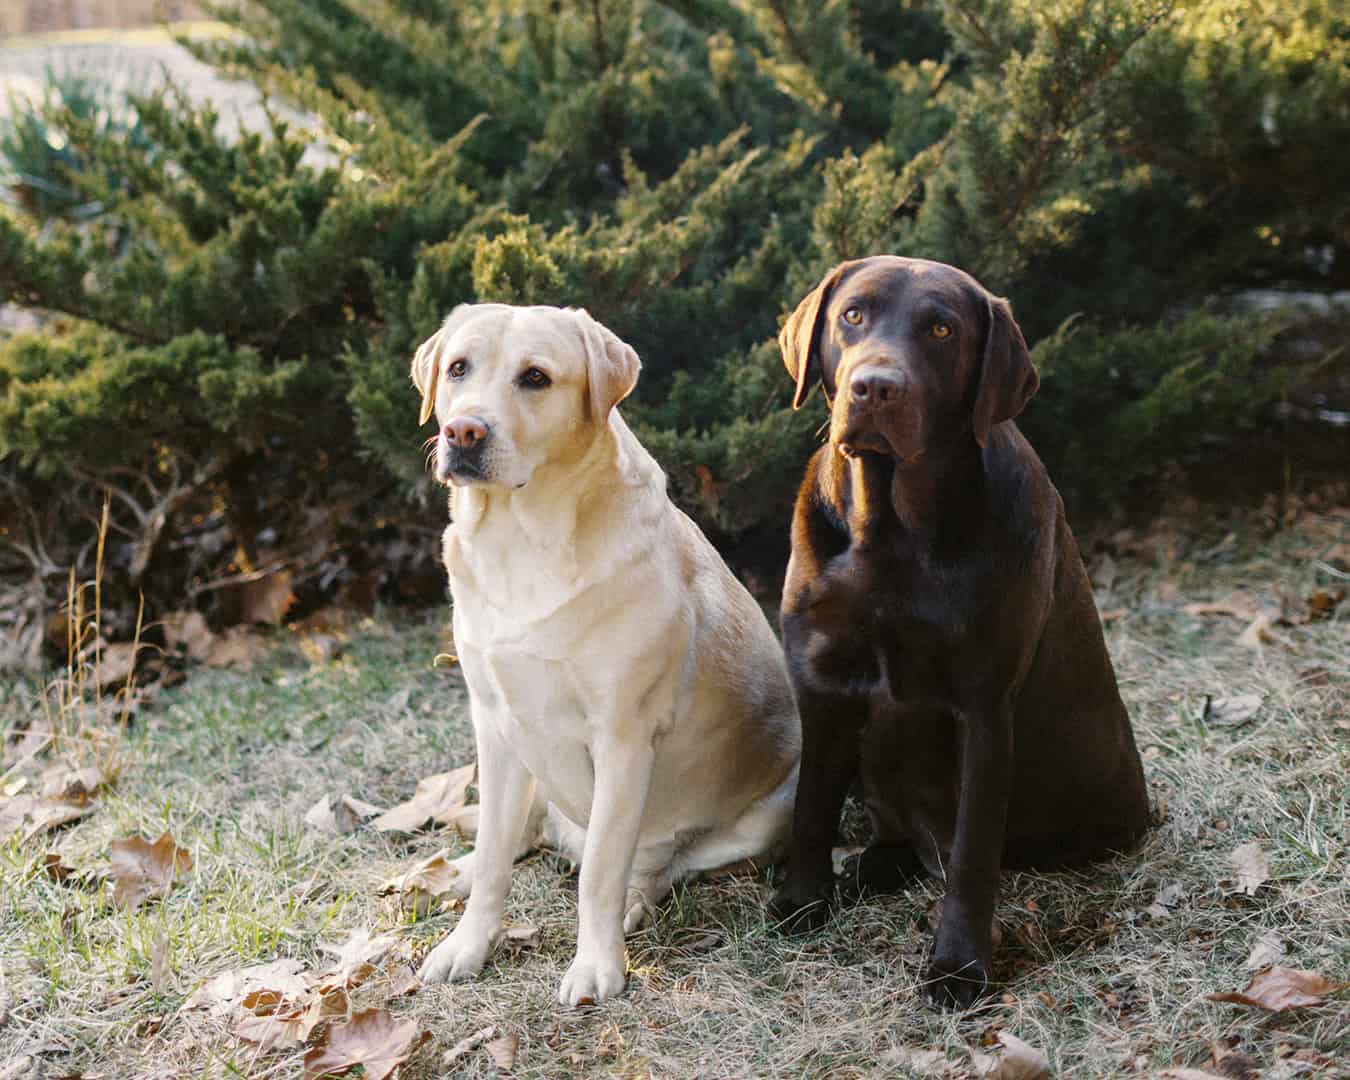 heritage creek labs yellow labrador and chocolate indiana dog breeder black labrador sitting outside together in sun